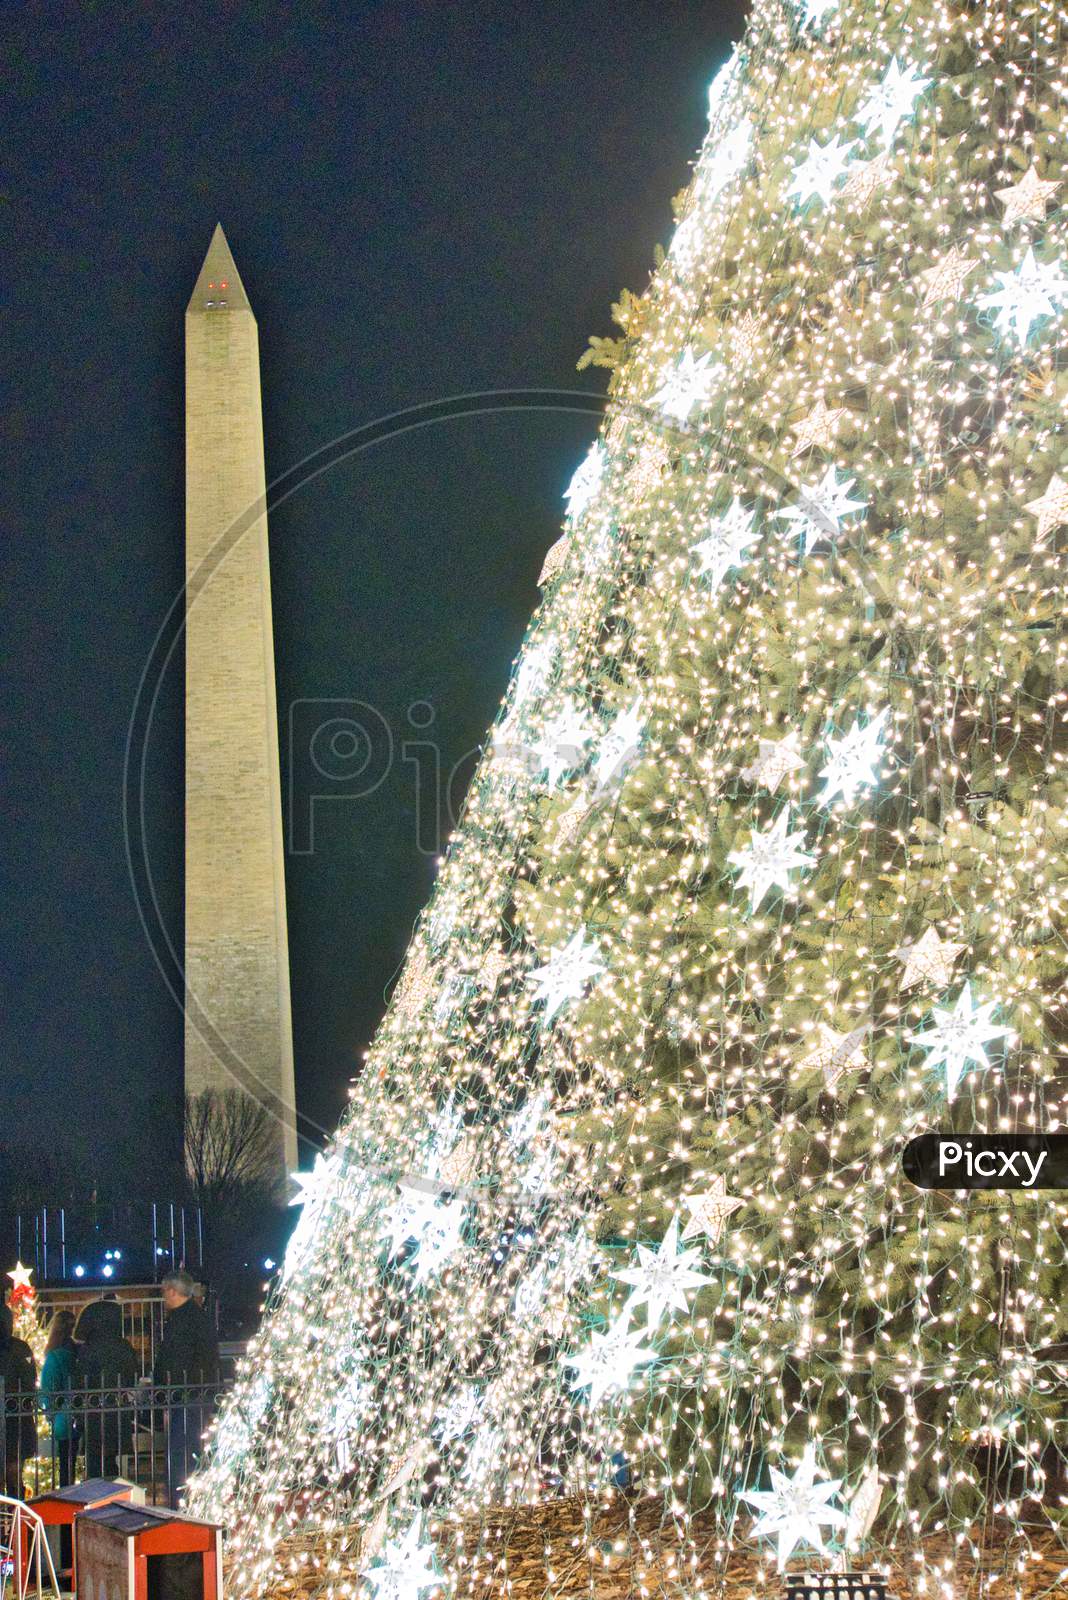 Washington Monument from different perspective